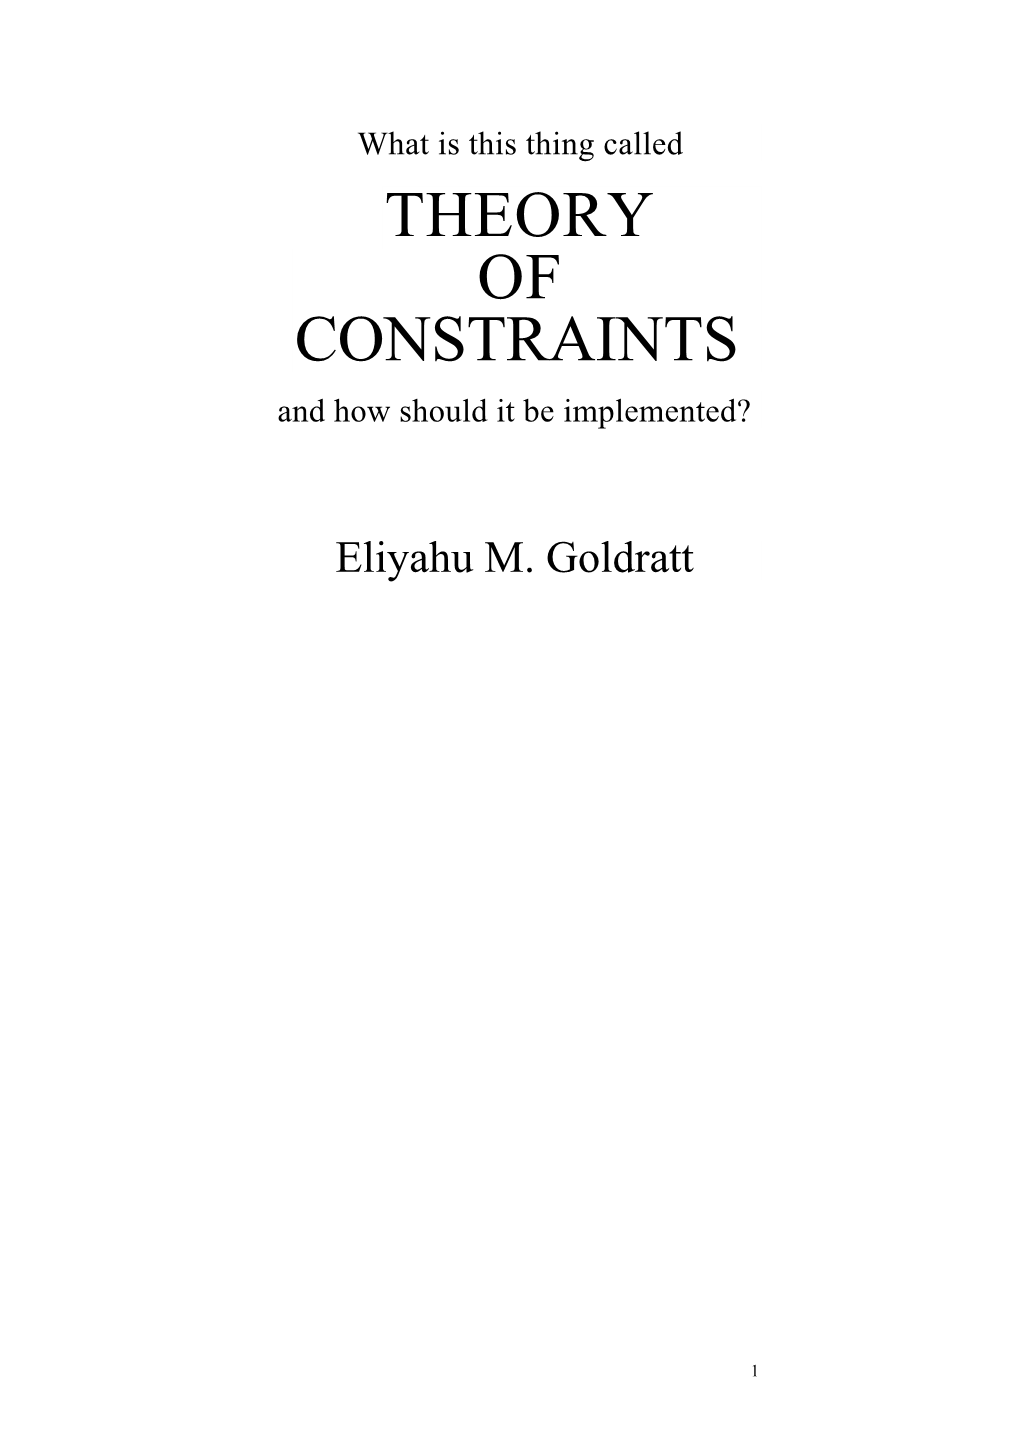 Theory of Constraints?